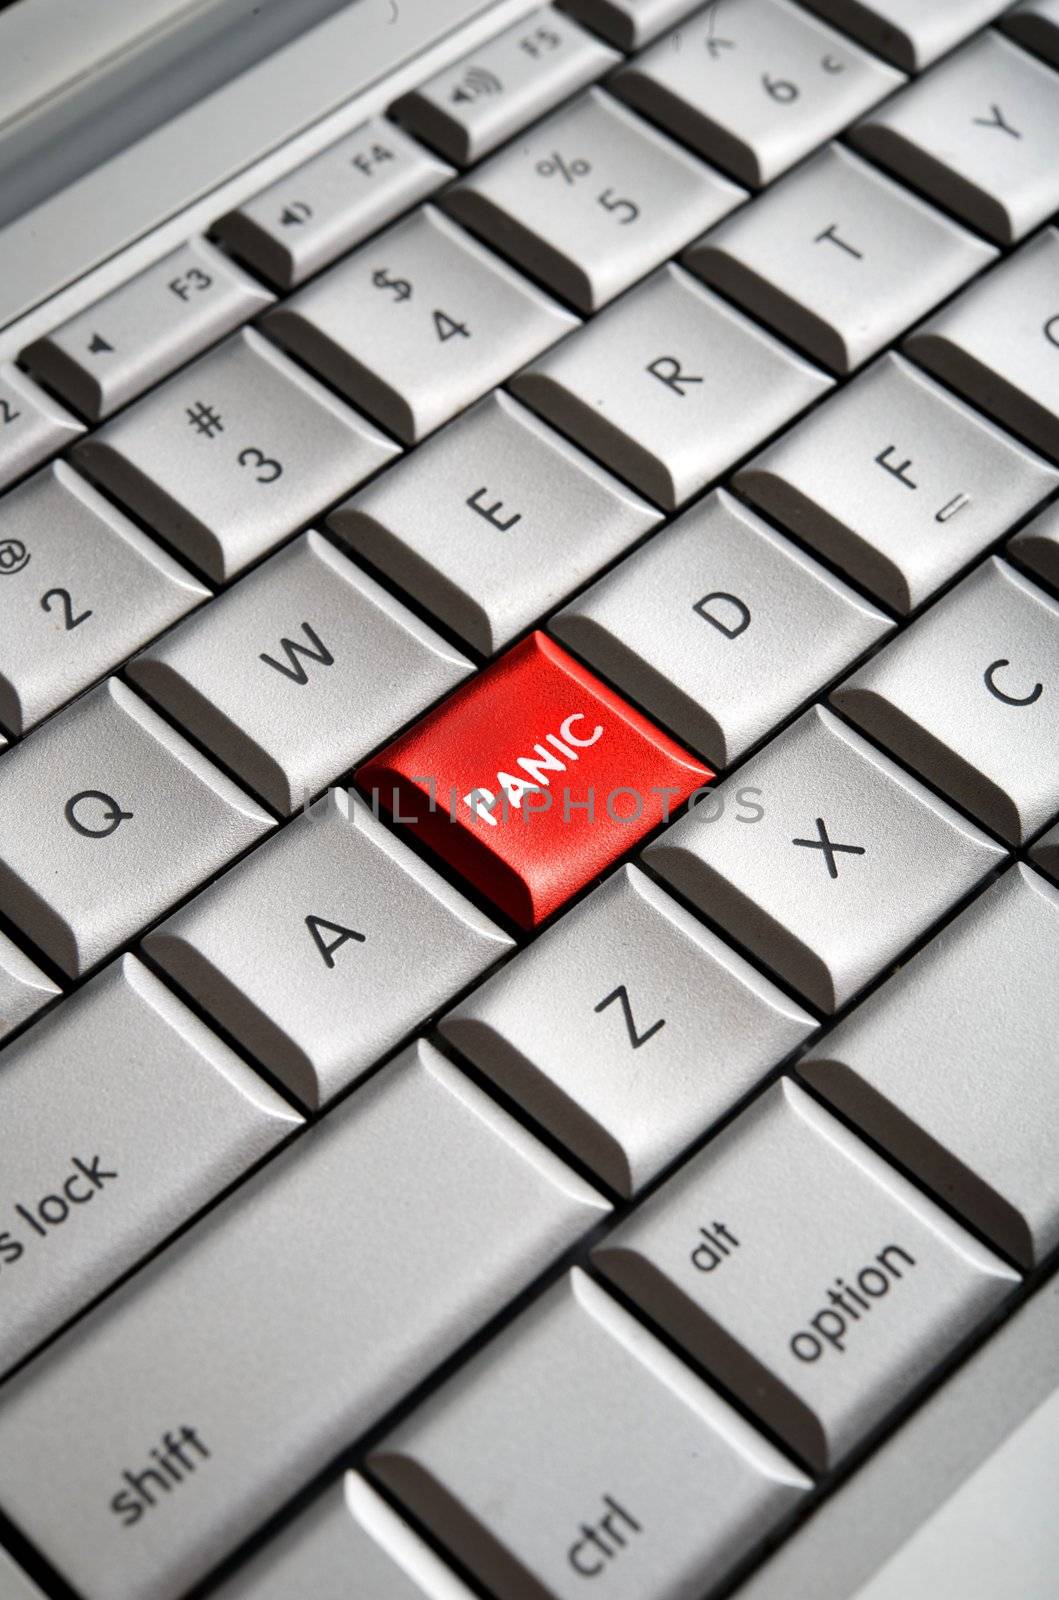 Close-up image of a red panic button on a traditional computer keyboard